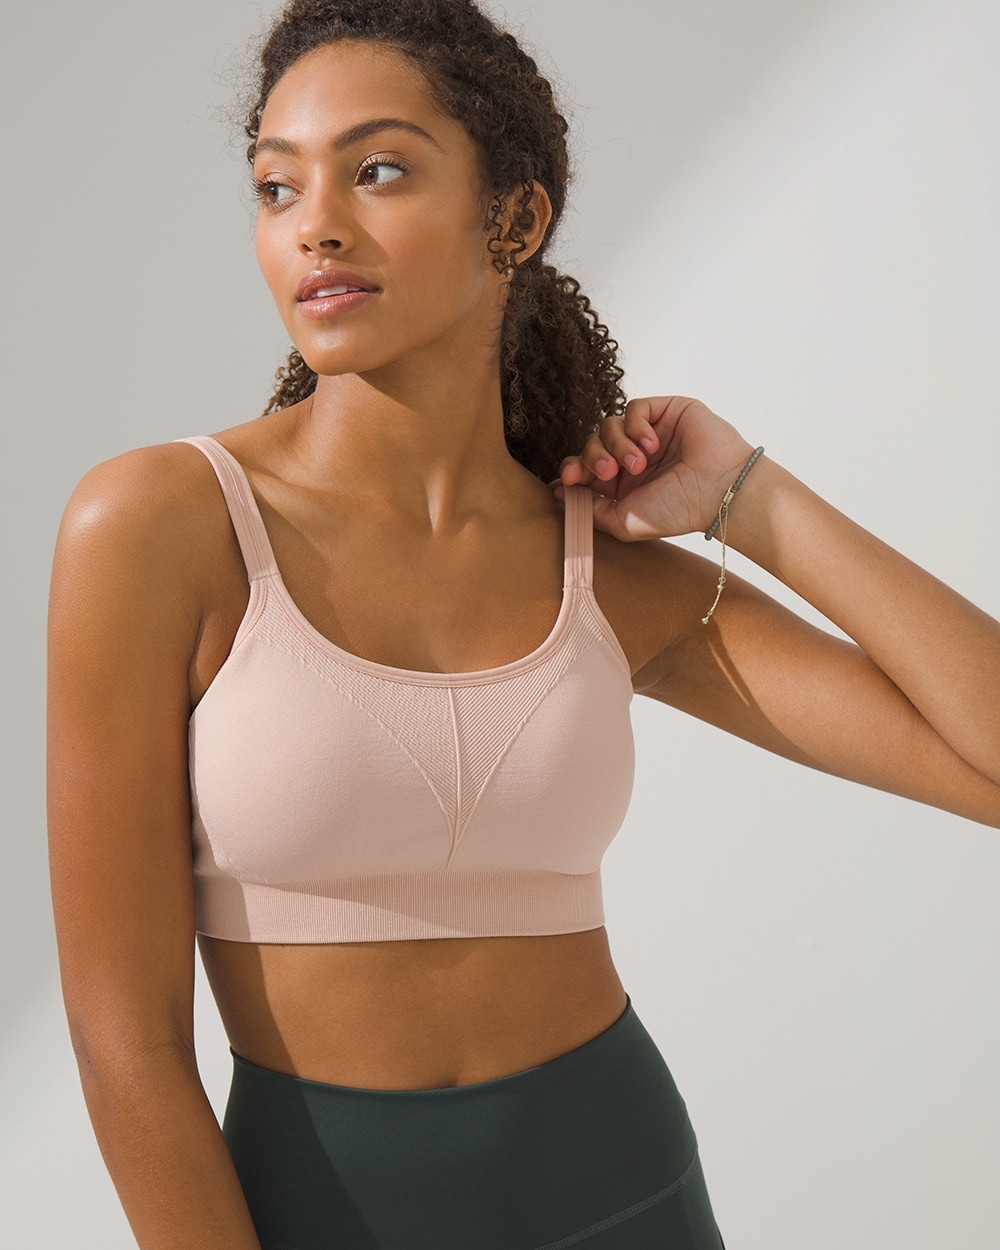 Ultimate Comfort and Support: LE MYSTERE Black Seamless Sport Bra